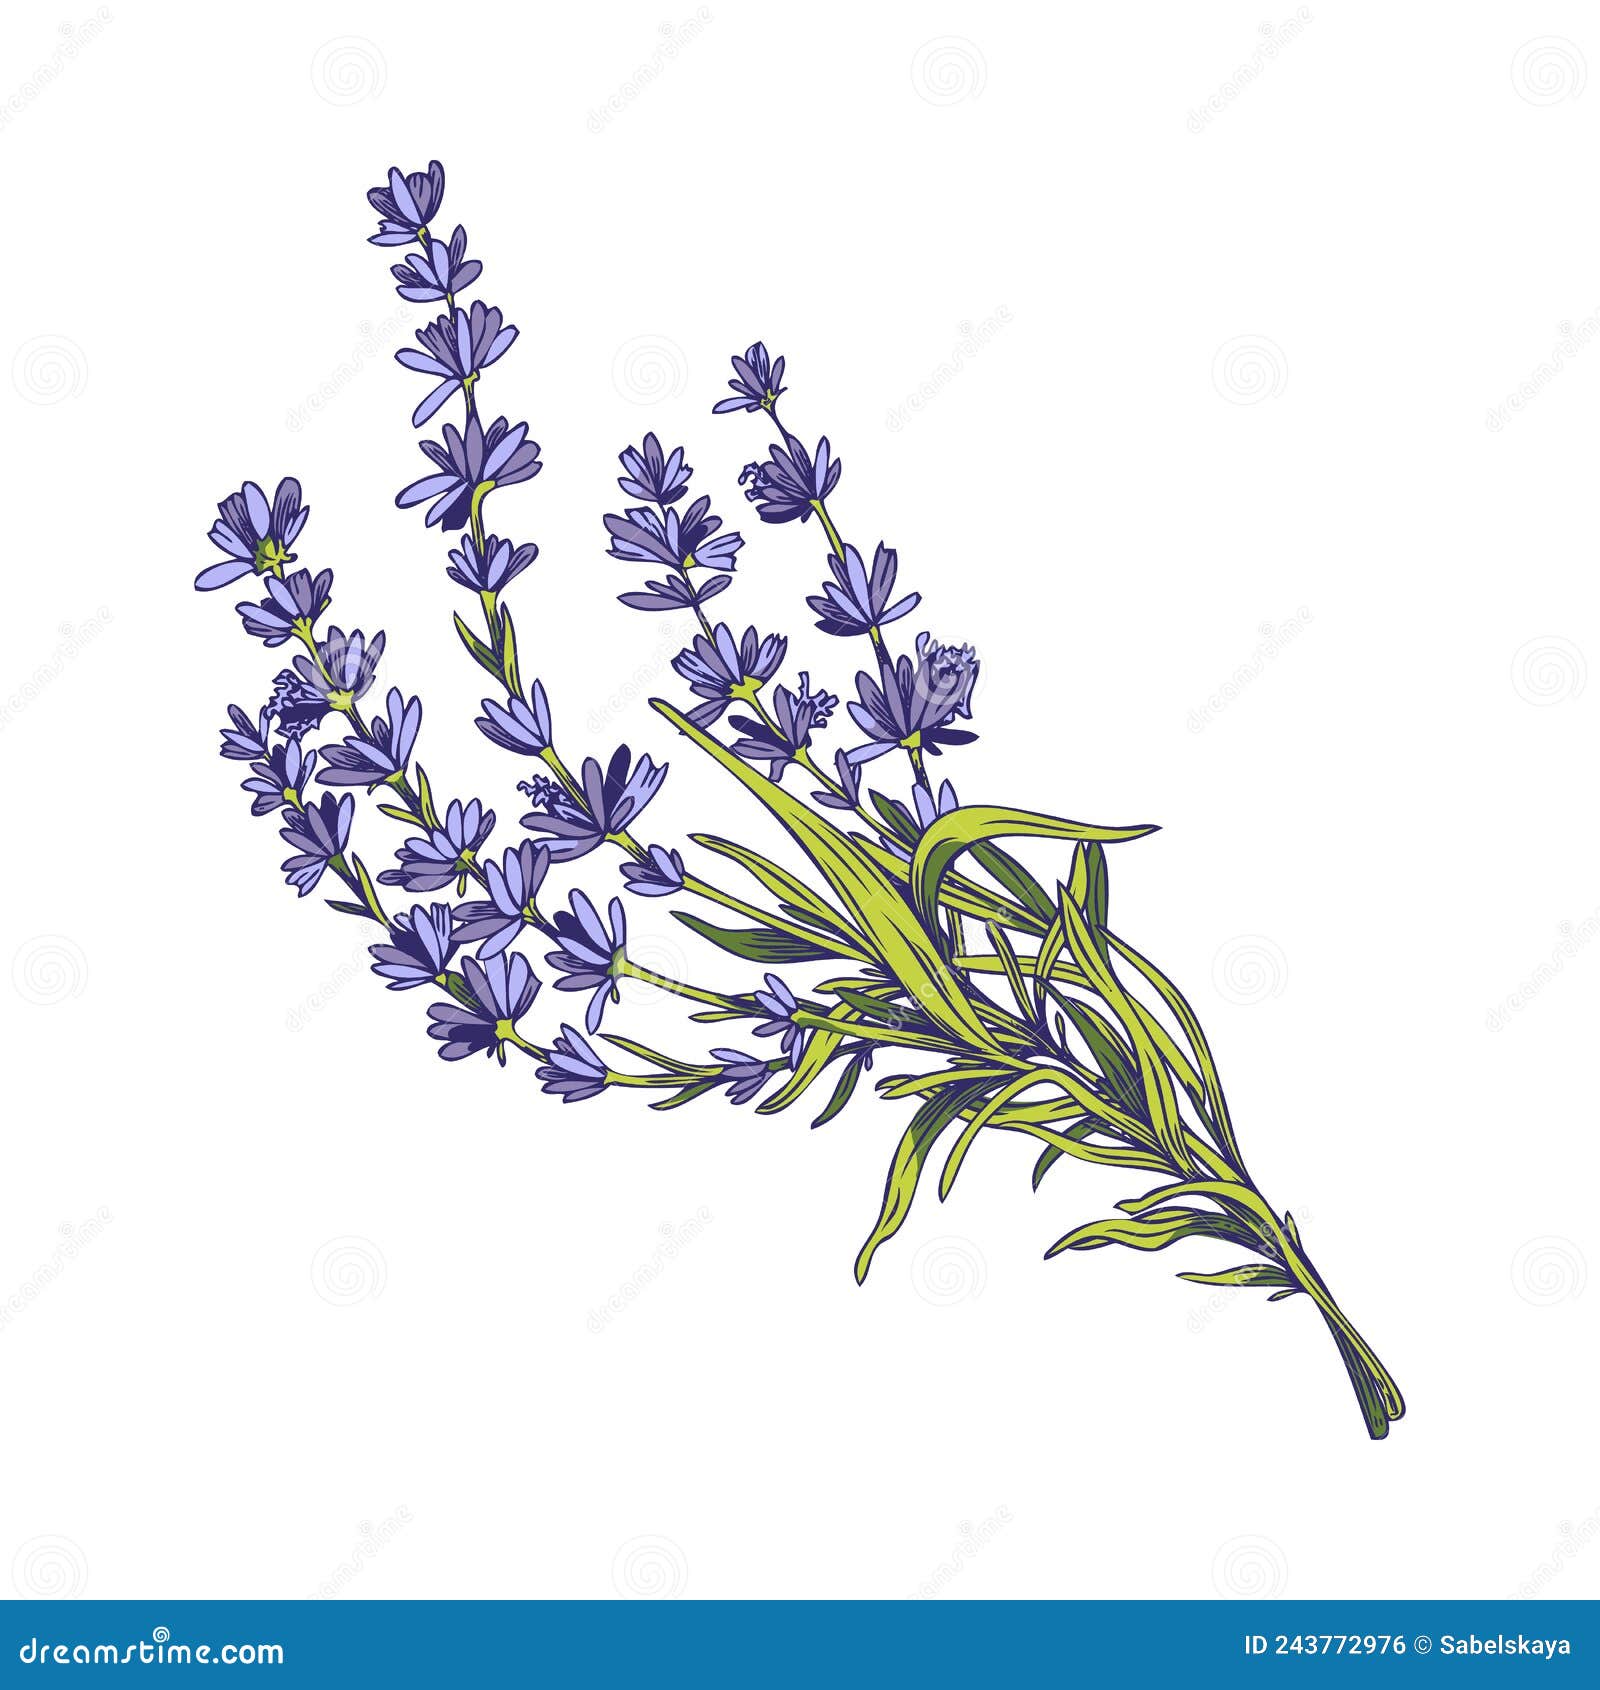 Lavender Flowers Bouquet Hand Drawn Vector Illustration Isolated on ...